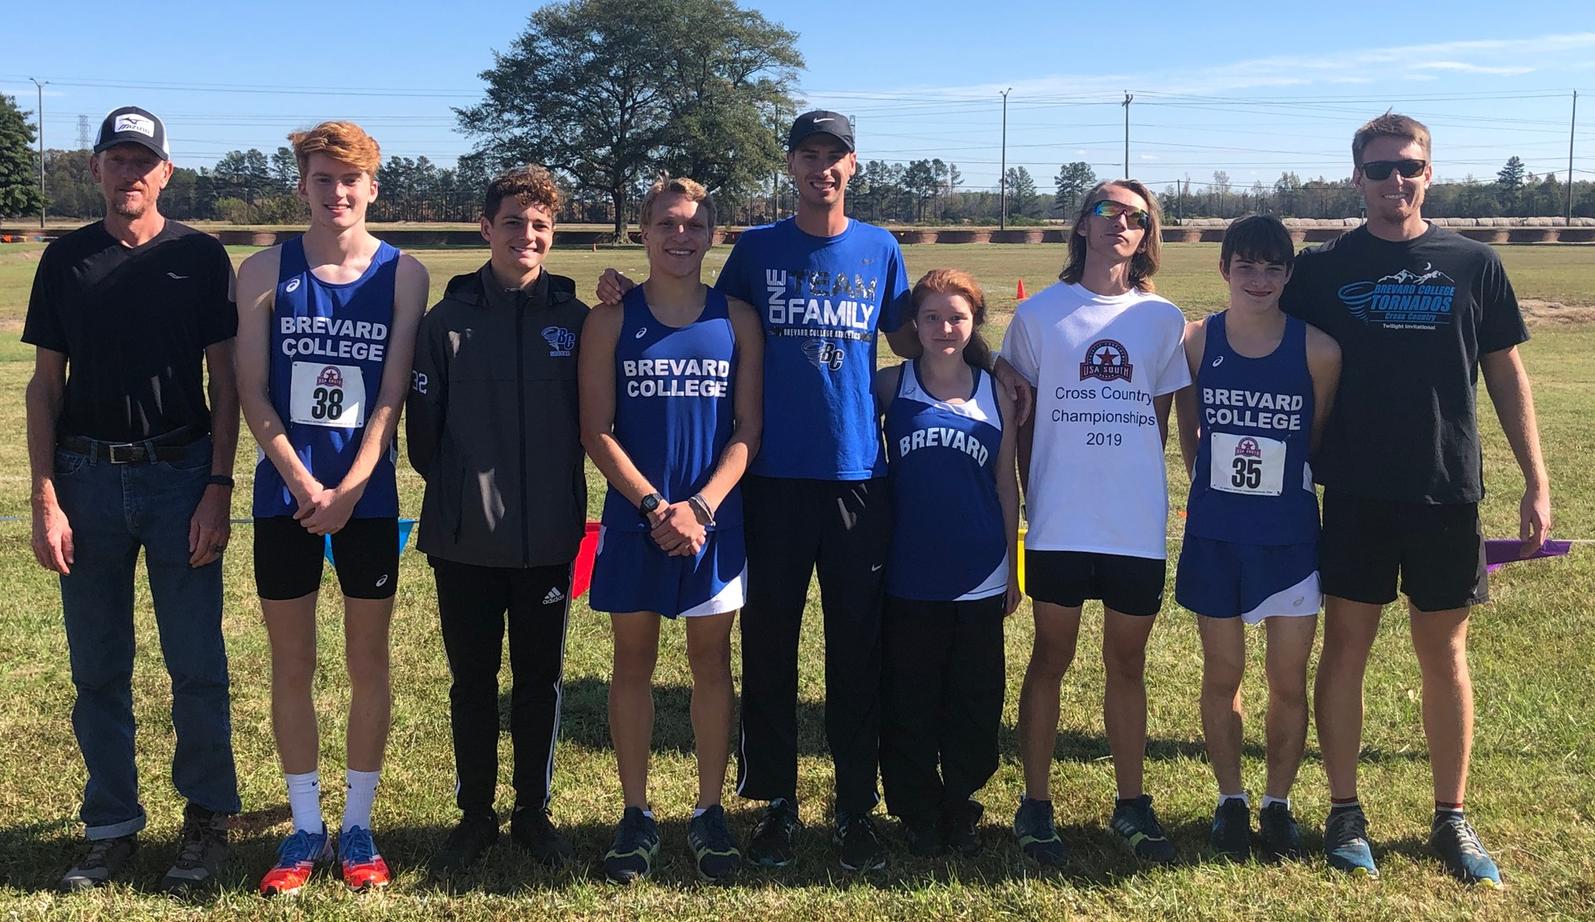 Brevard's representatives at the 2019 USA South Cross Country Championships. Pictured L/R: Volunteer Assistant Coach Chad Newton, Miles Schafer, Dylan Freeman, Solomon Turner, Head Coach Darryll Patrick, Abigail Juul, Gavin Morgan, Michael Fader, & Assistant Coach Jordan Tager.